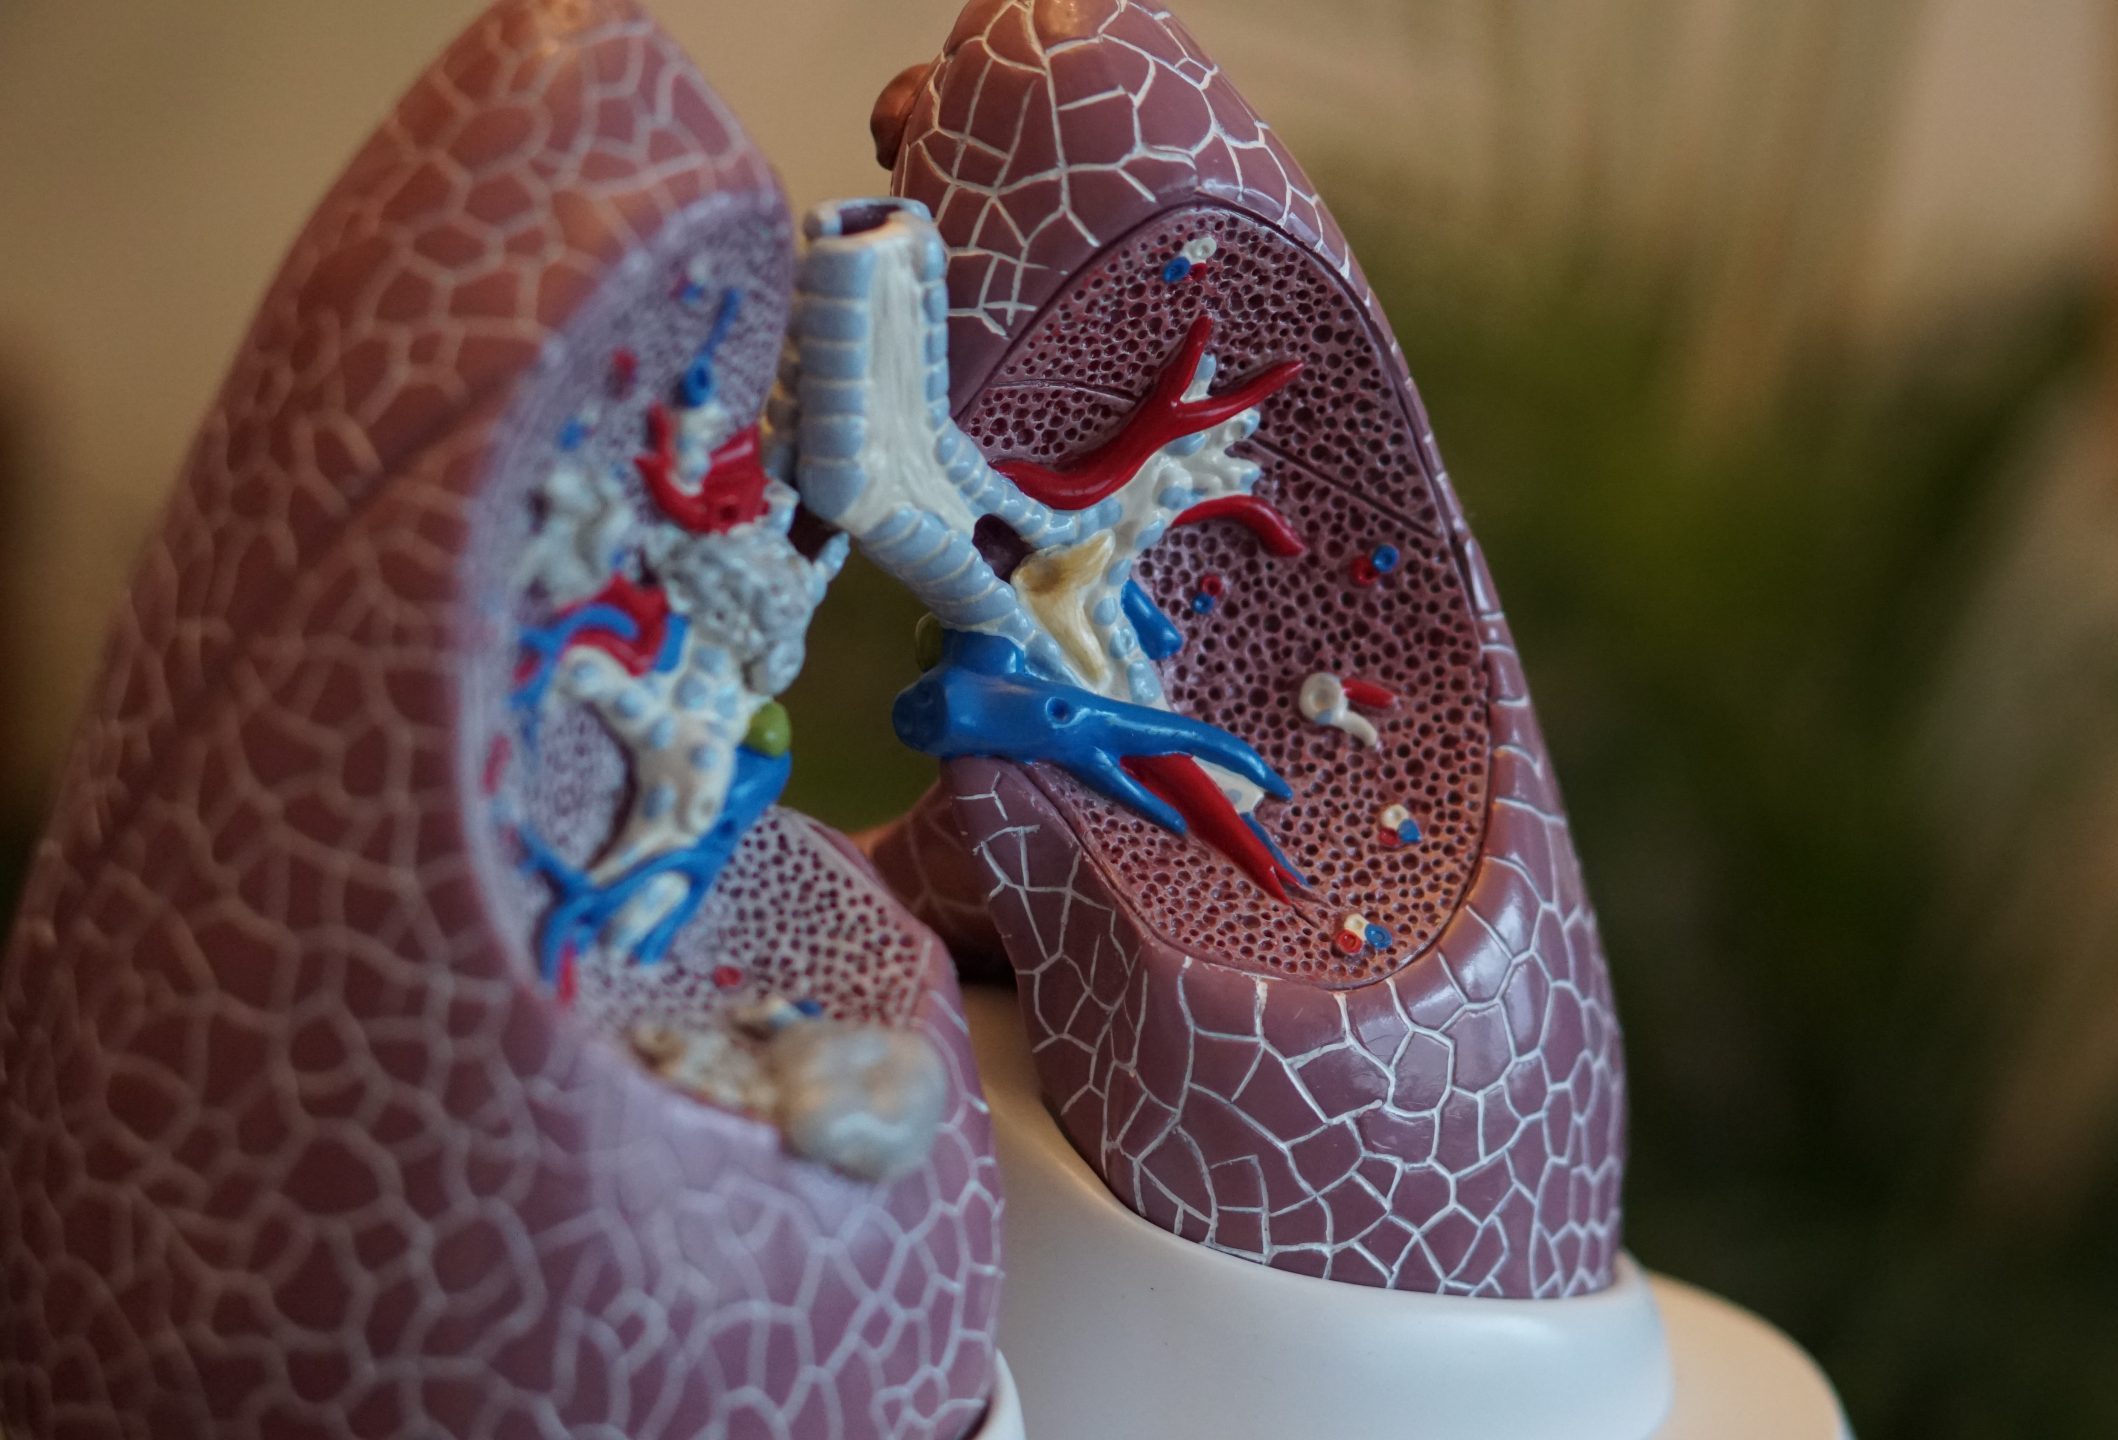 Model of lungs to illustrate cystic fibrosis